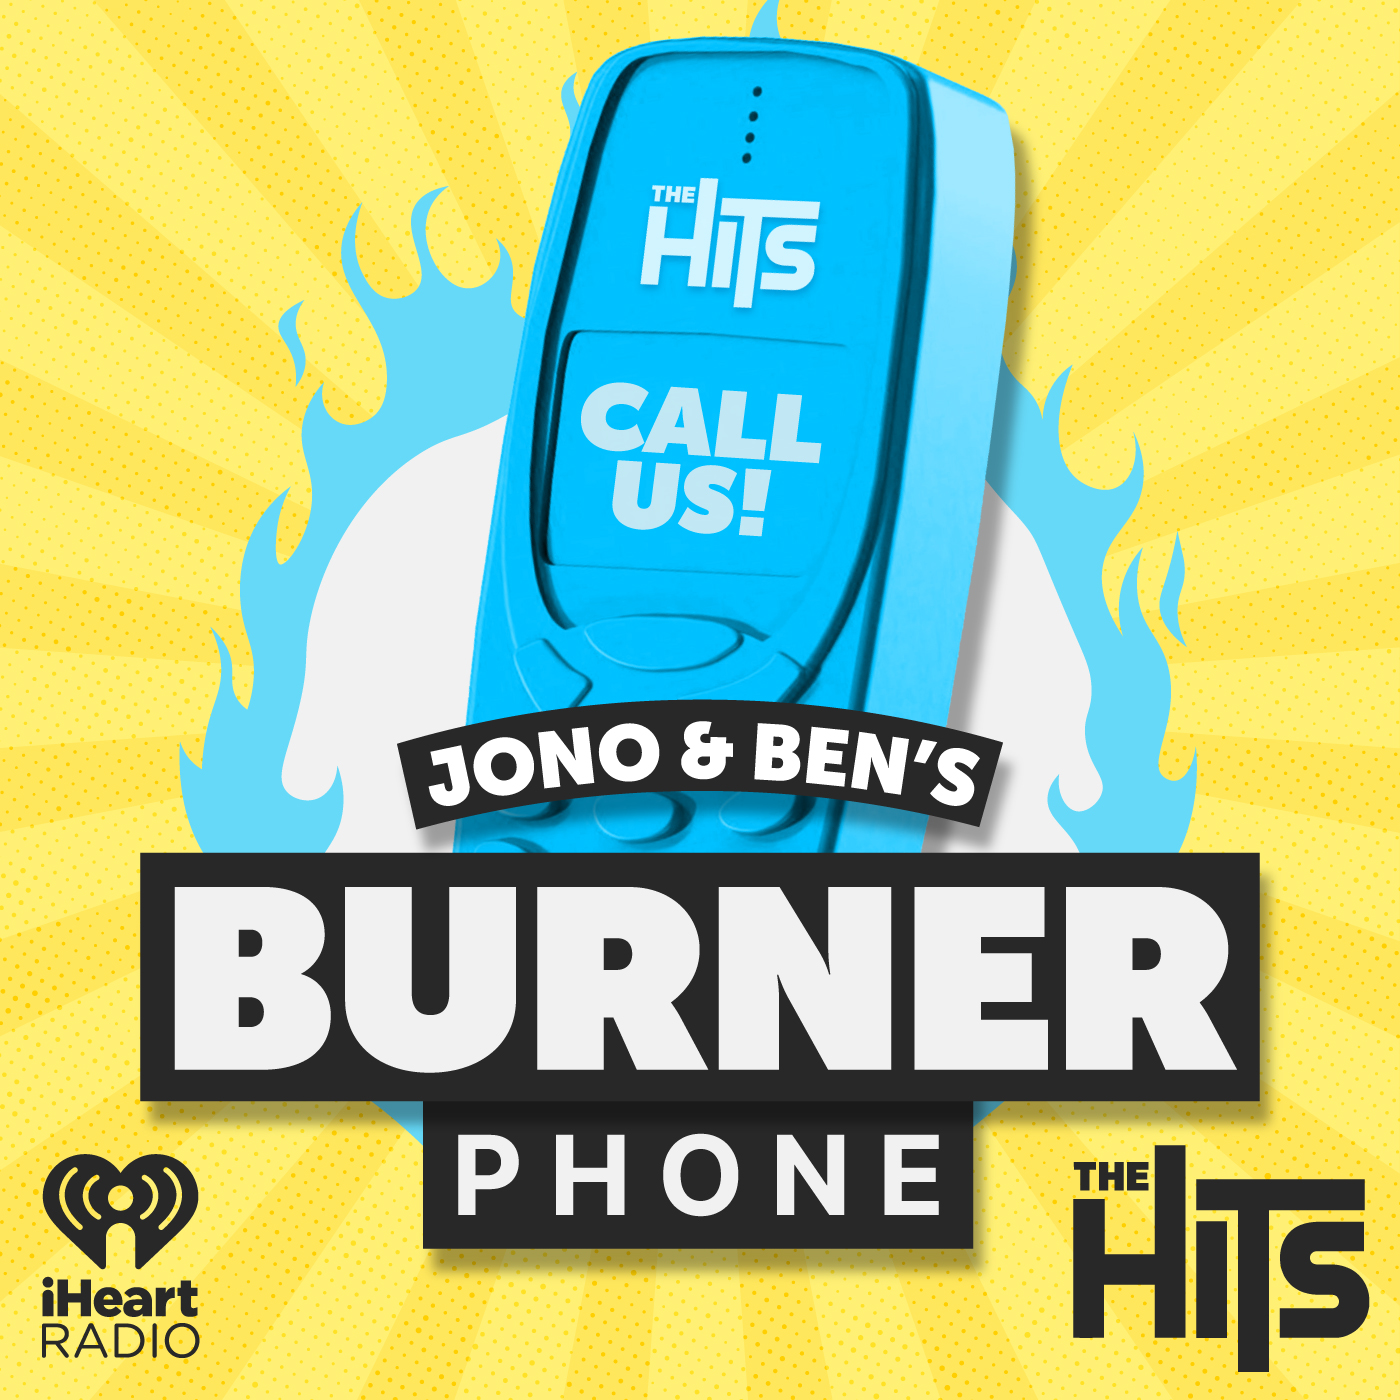 The Burner Phone 6: DJ Hamish Wants To Hit The Pipes..